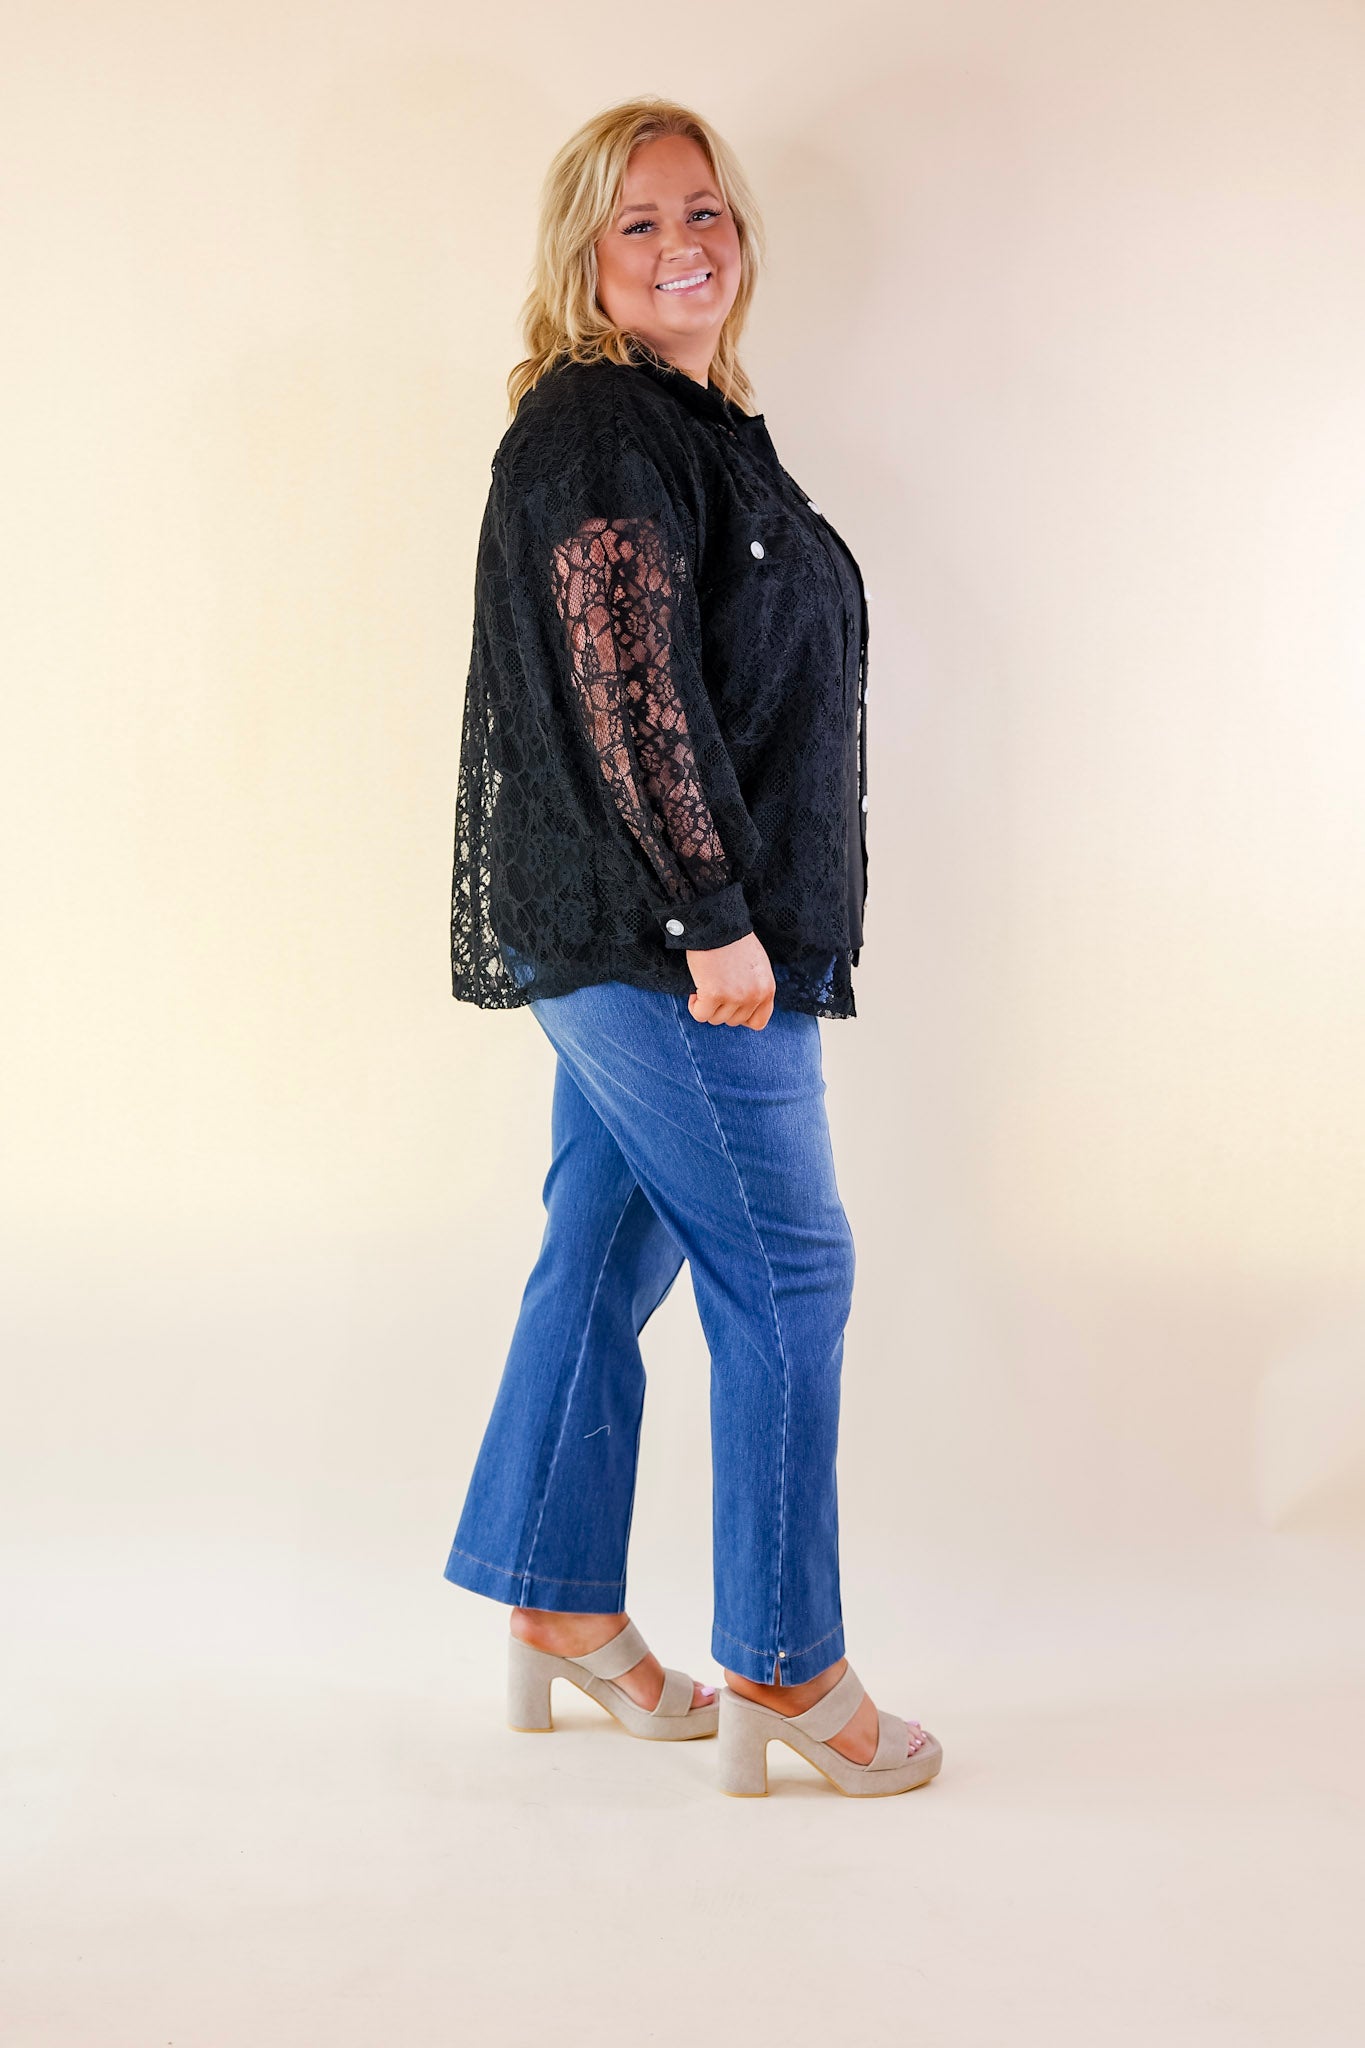 Sheer Chic Collared Button Up Lace Top in Black